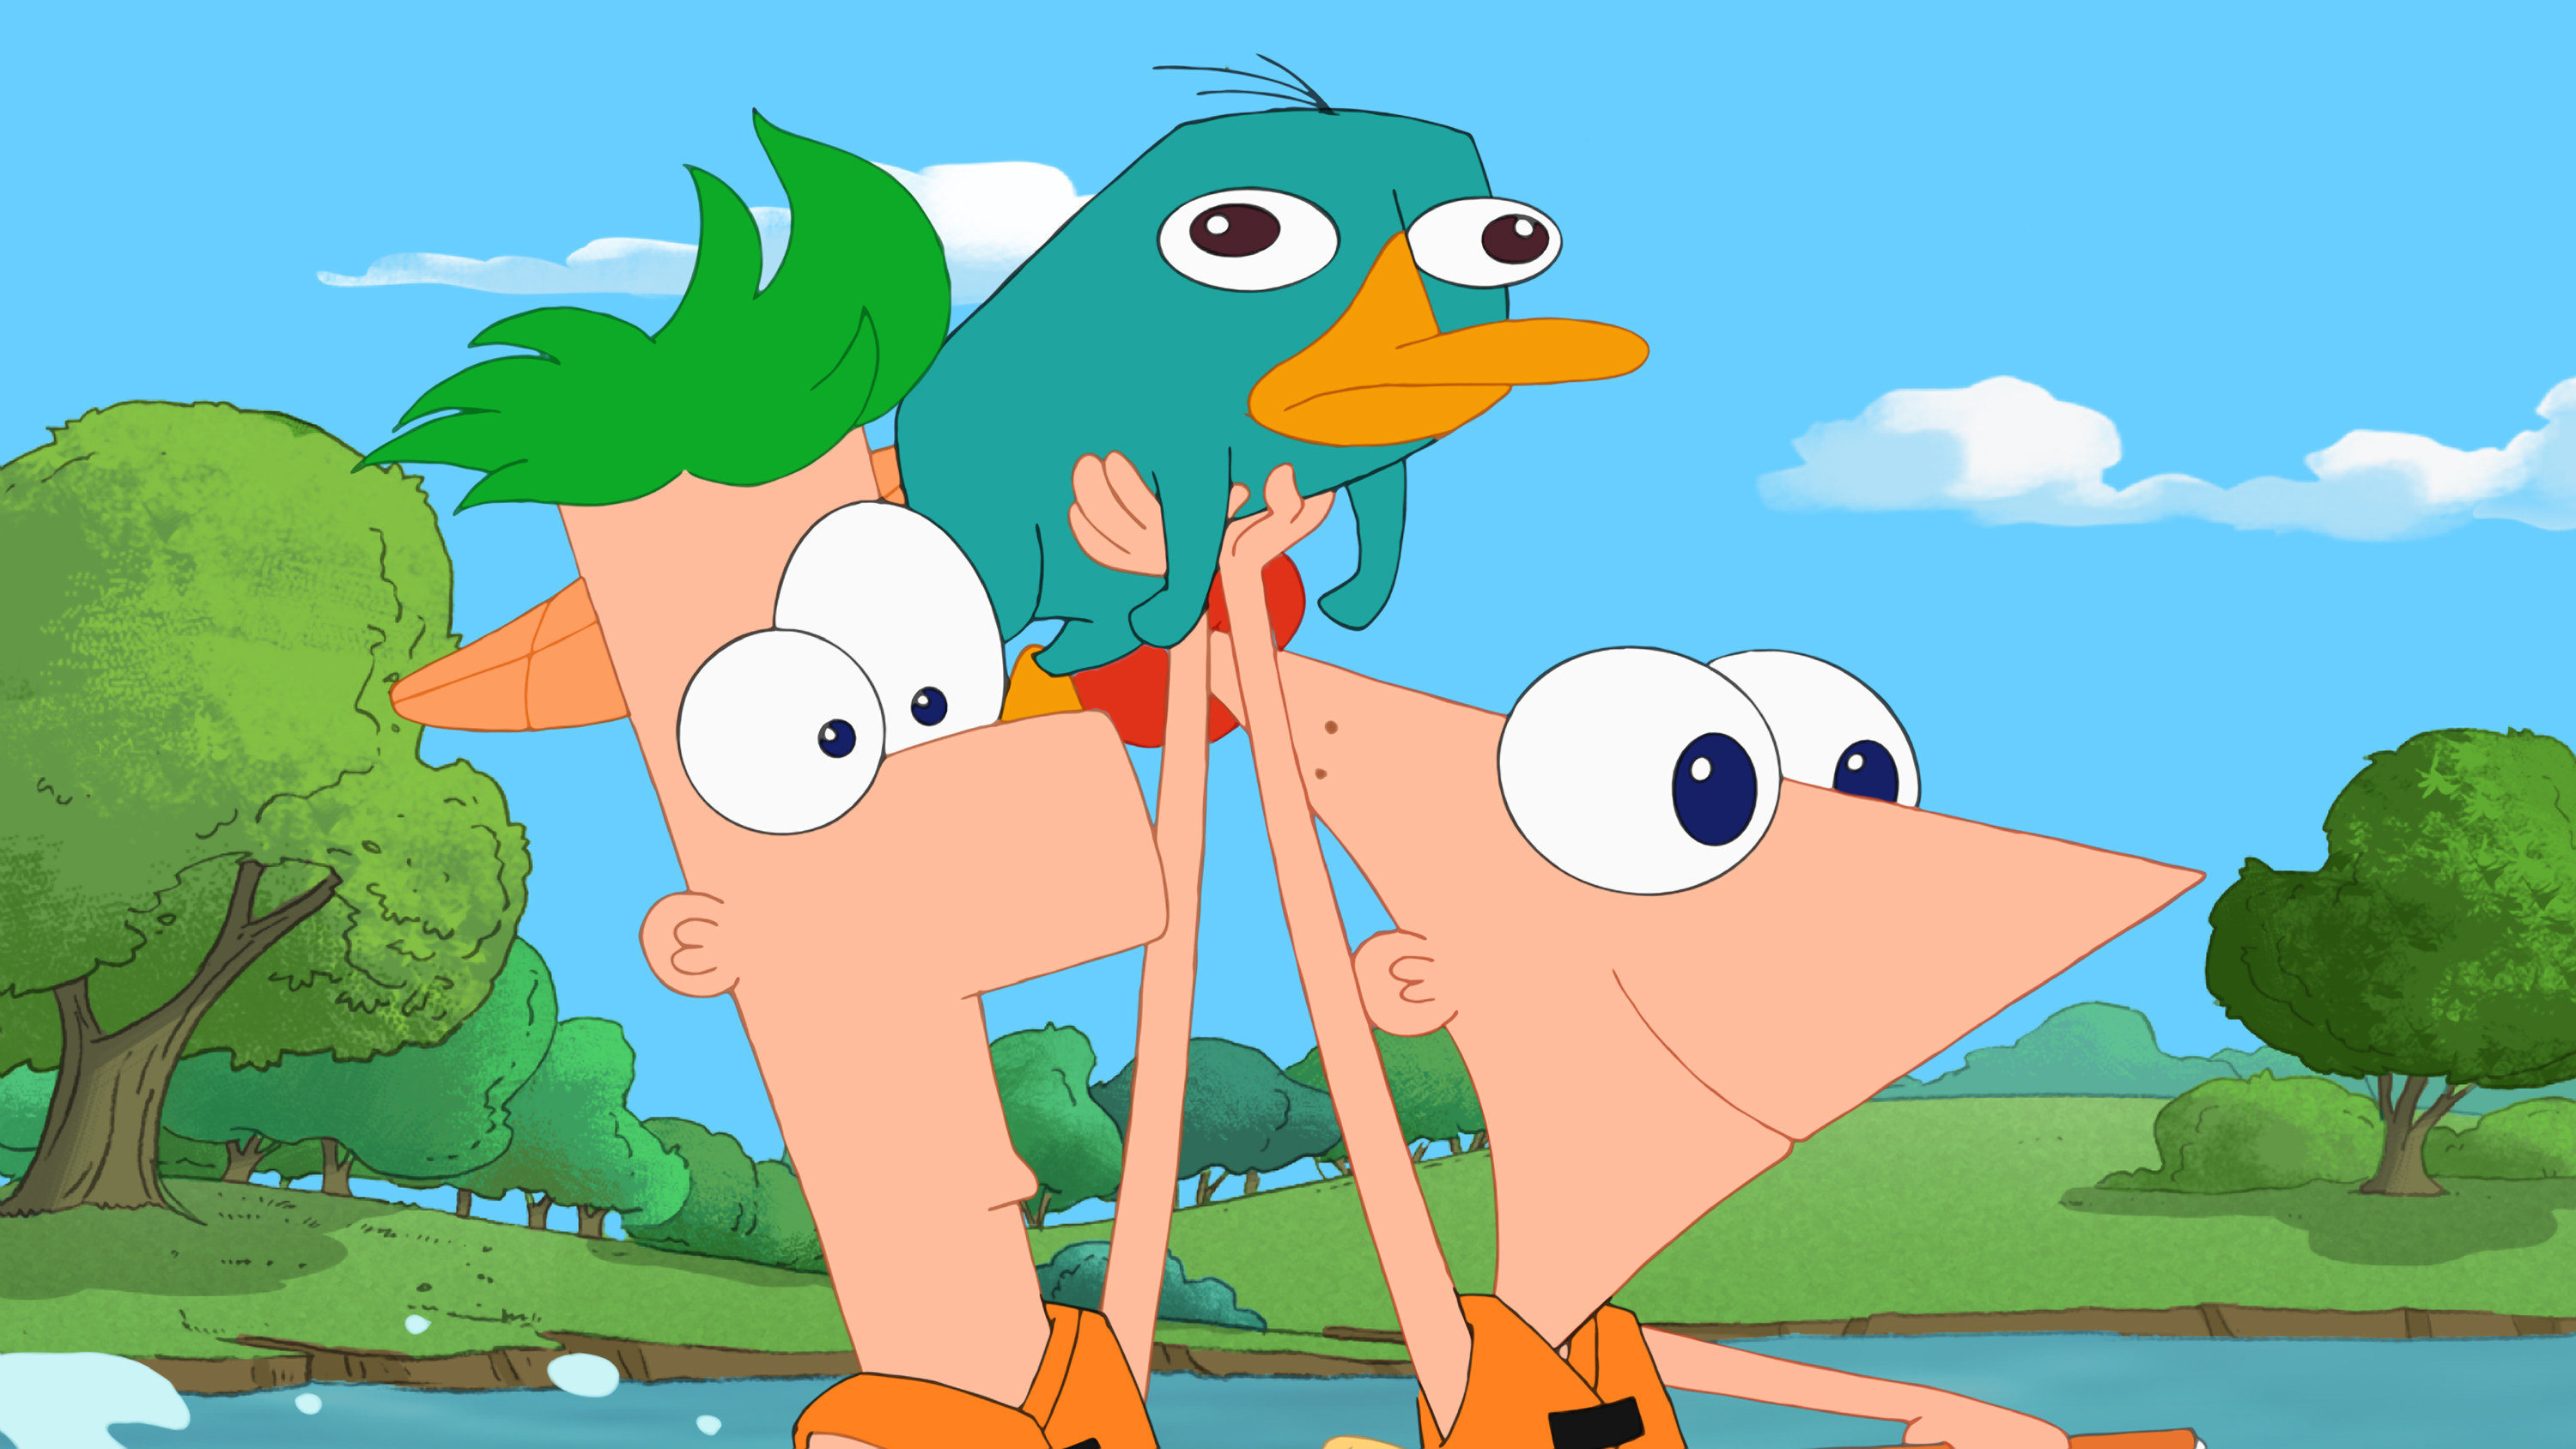 Phineas and Ferb hold up their platypus